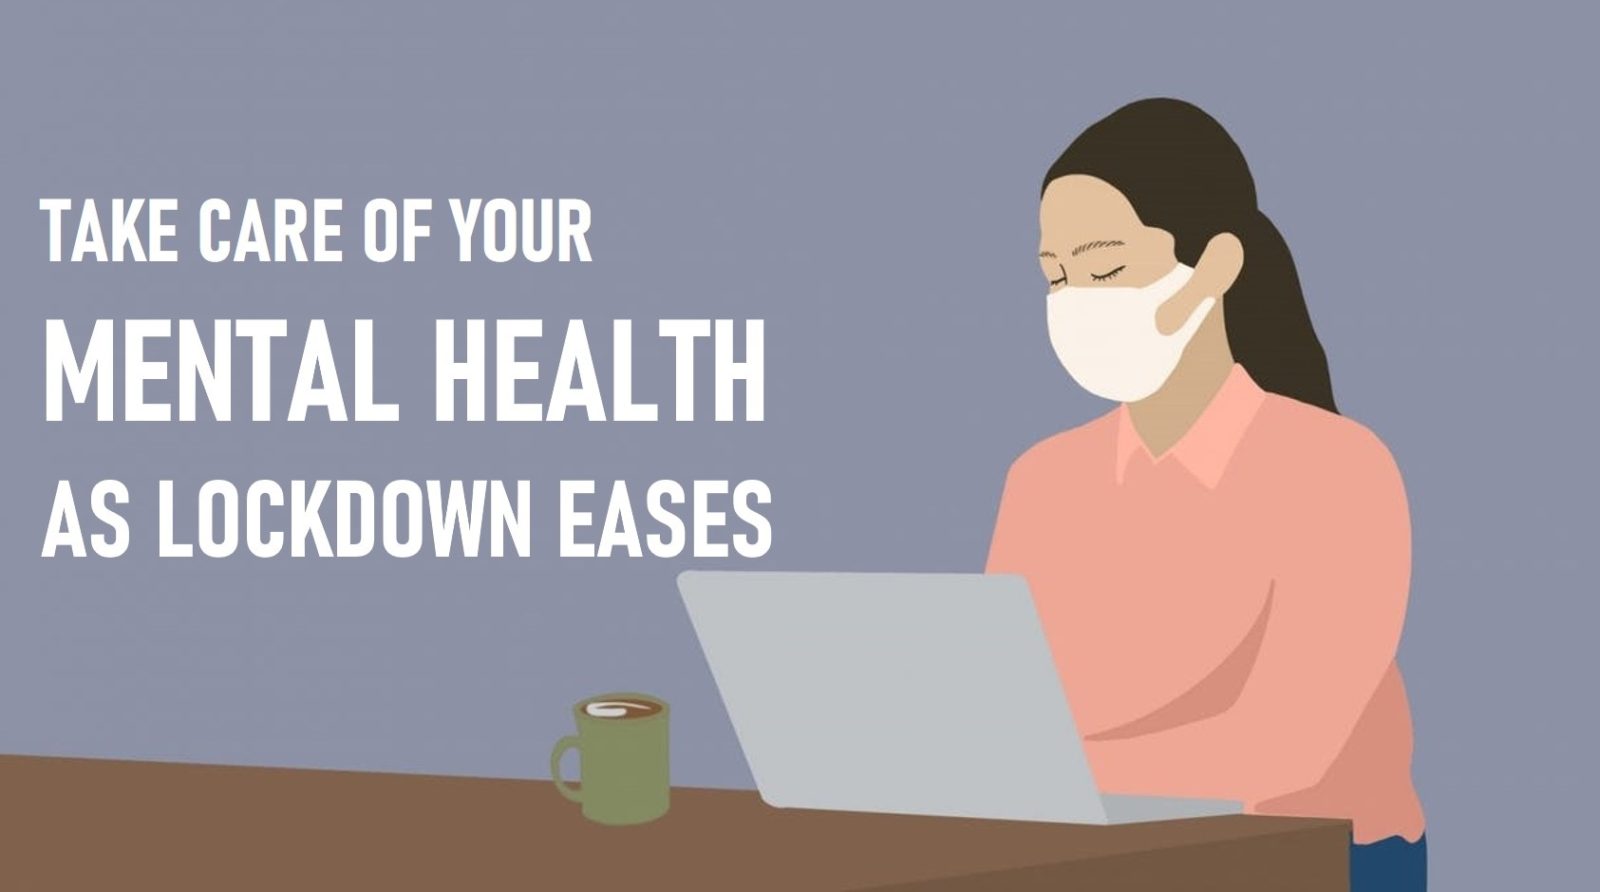 How To Take Care Of Your Mental Health As Lockdown Eases